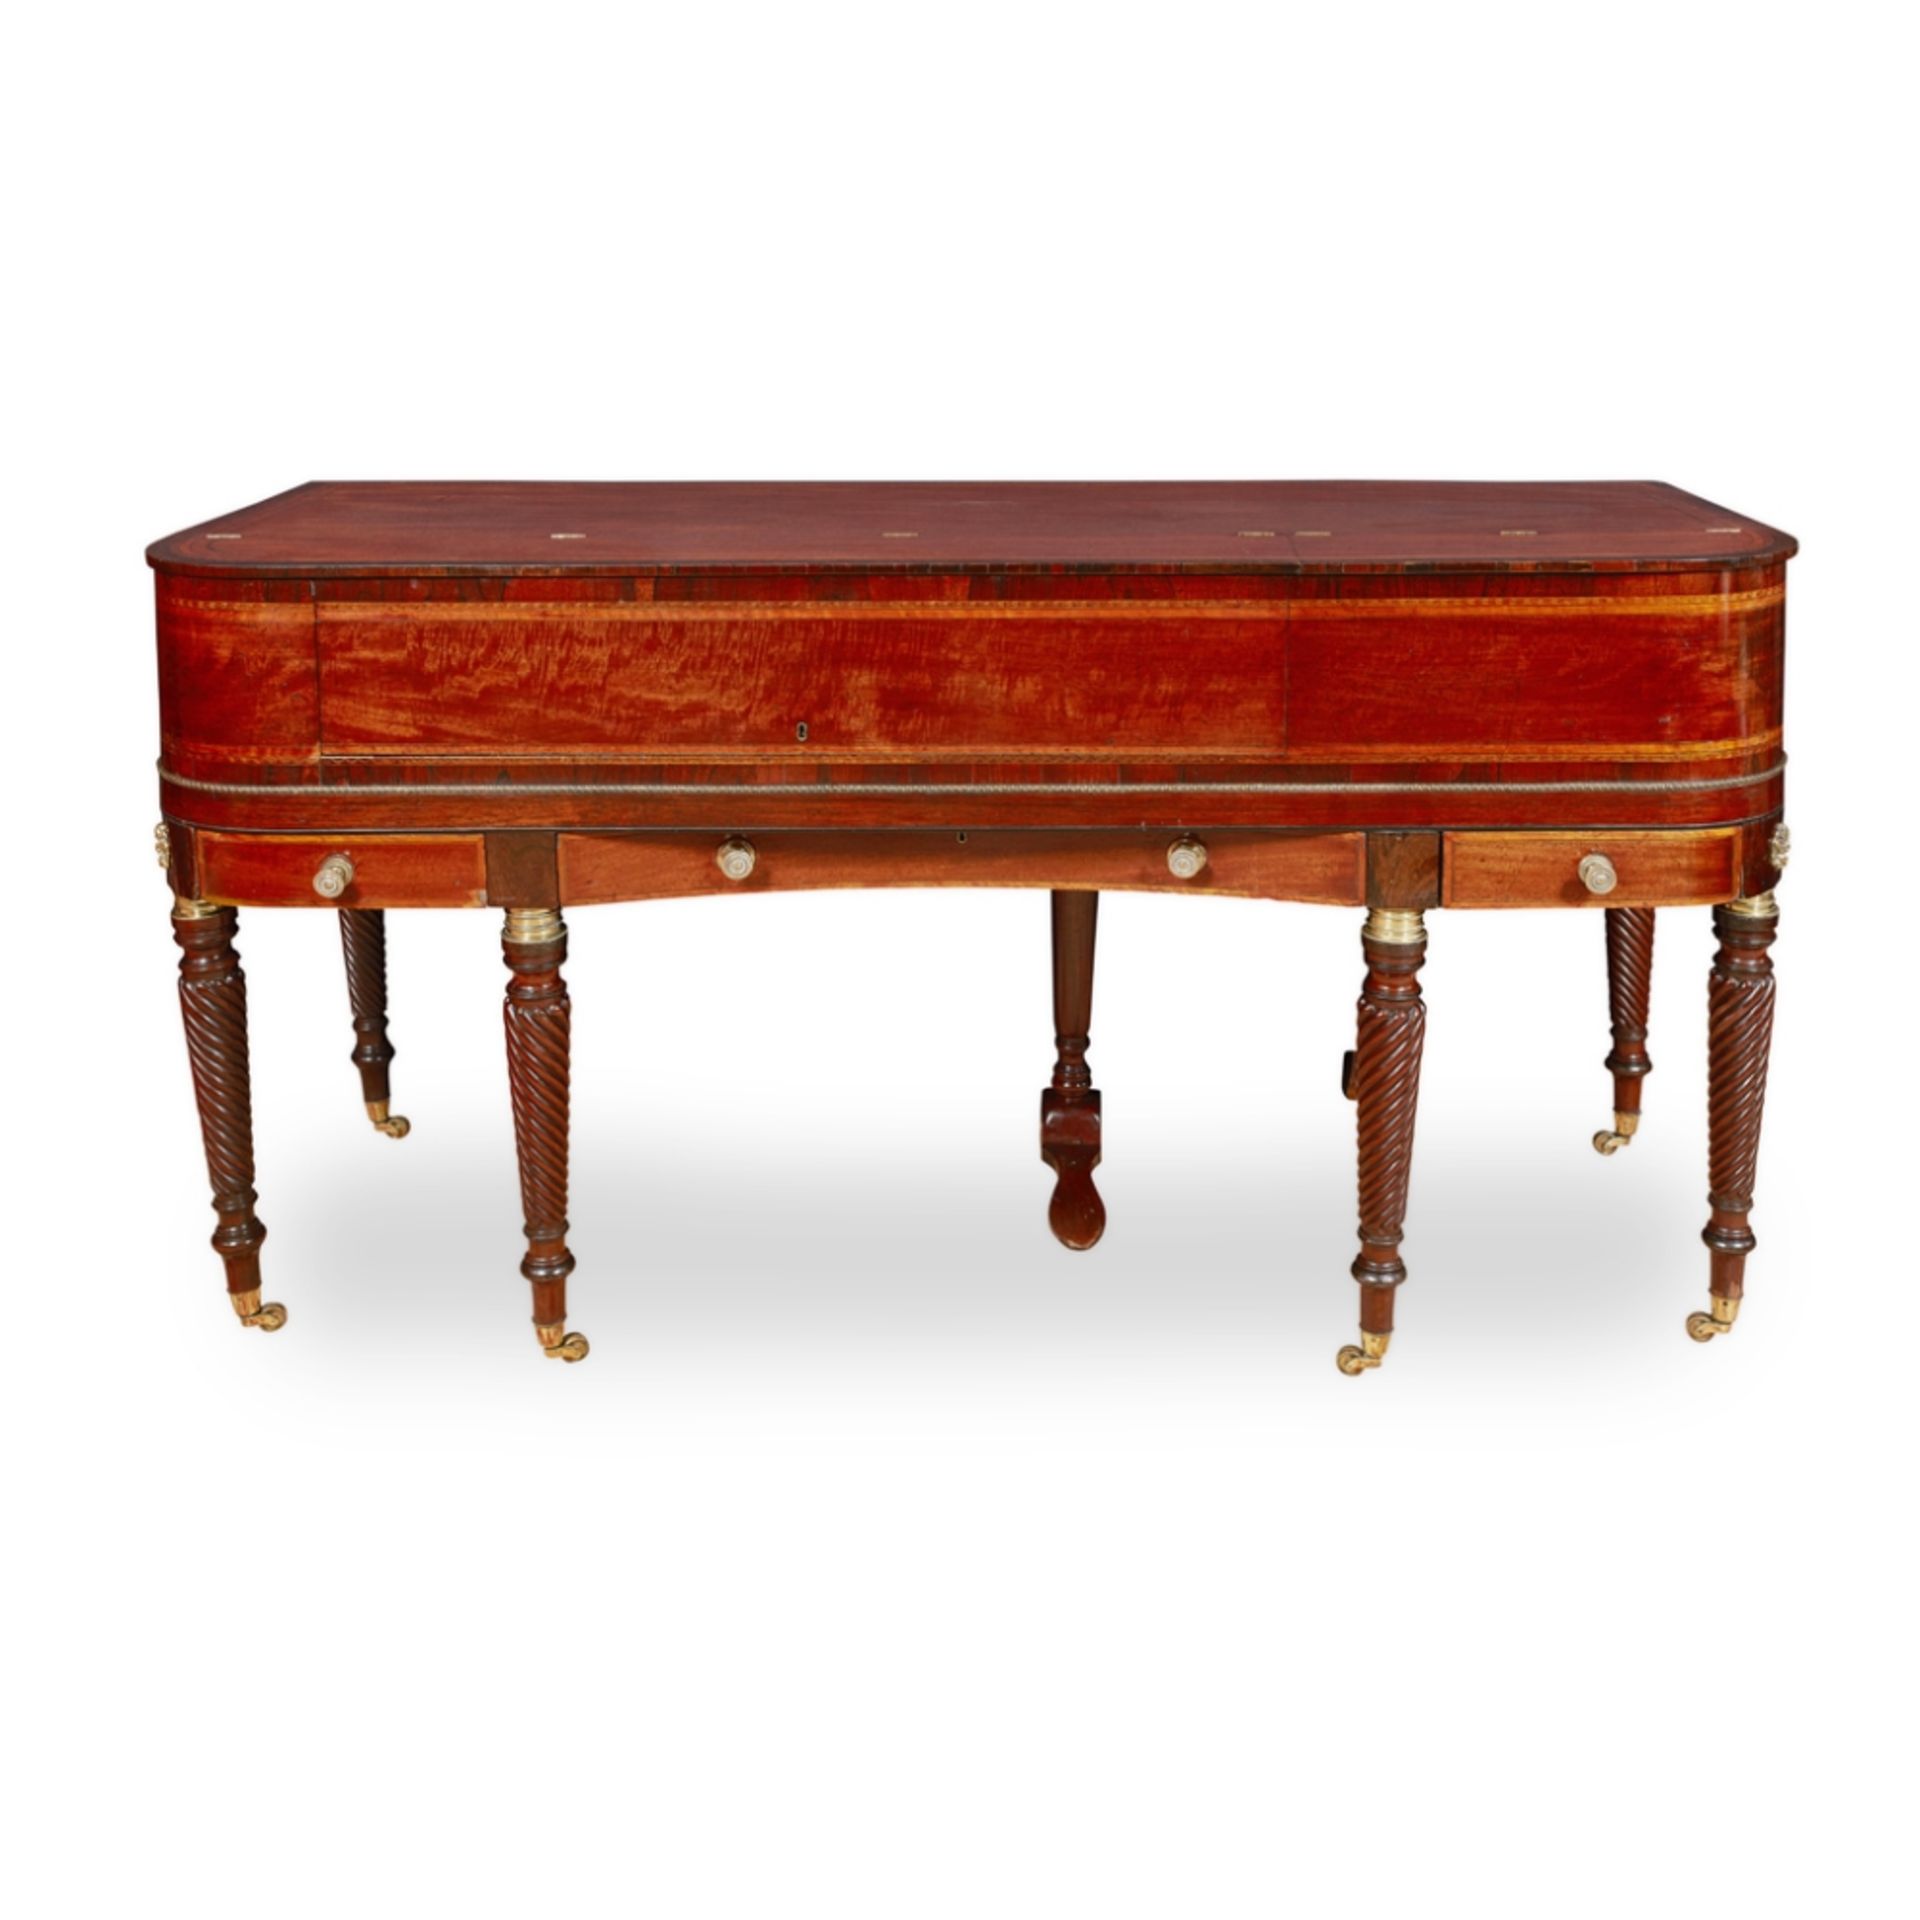 WILLIAM ROLFE & COMPANY, LONDON REGENCY MAHOGANY AND ROSEWOOD SQUARE PIANO, EARLY 19TH CENTURY the - Image 3 of 3